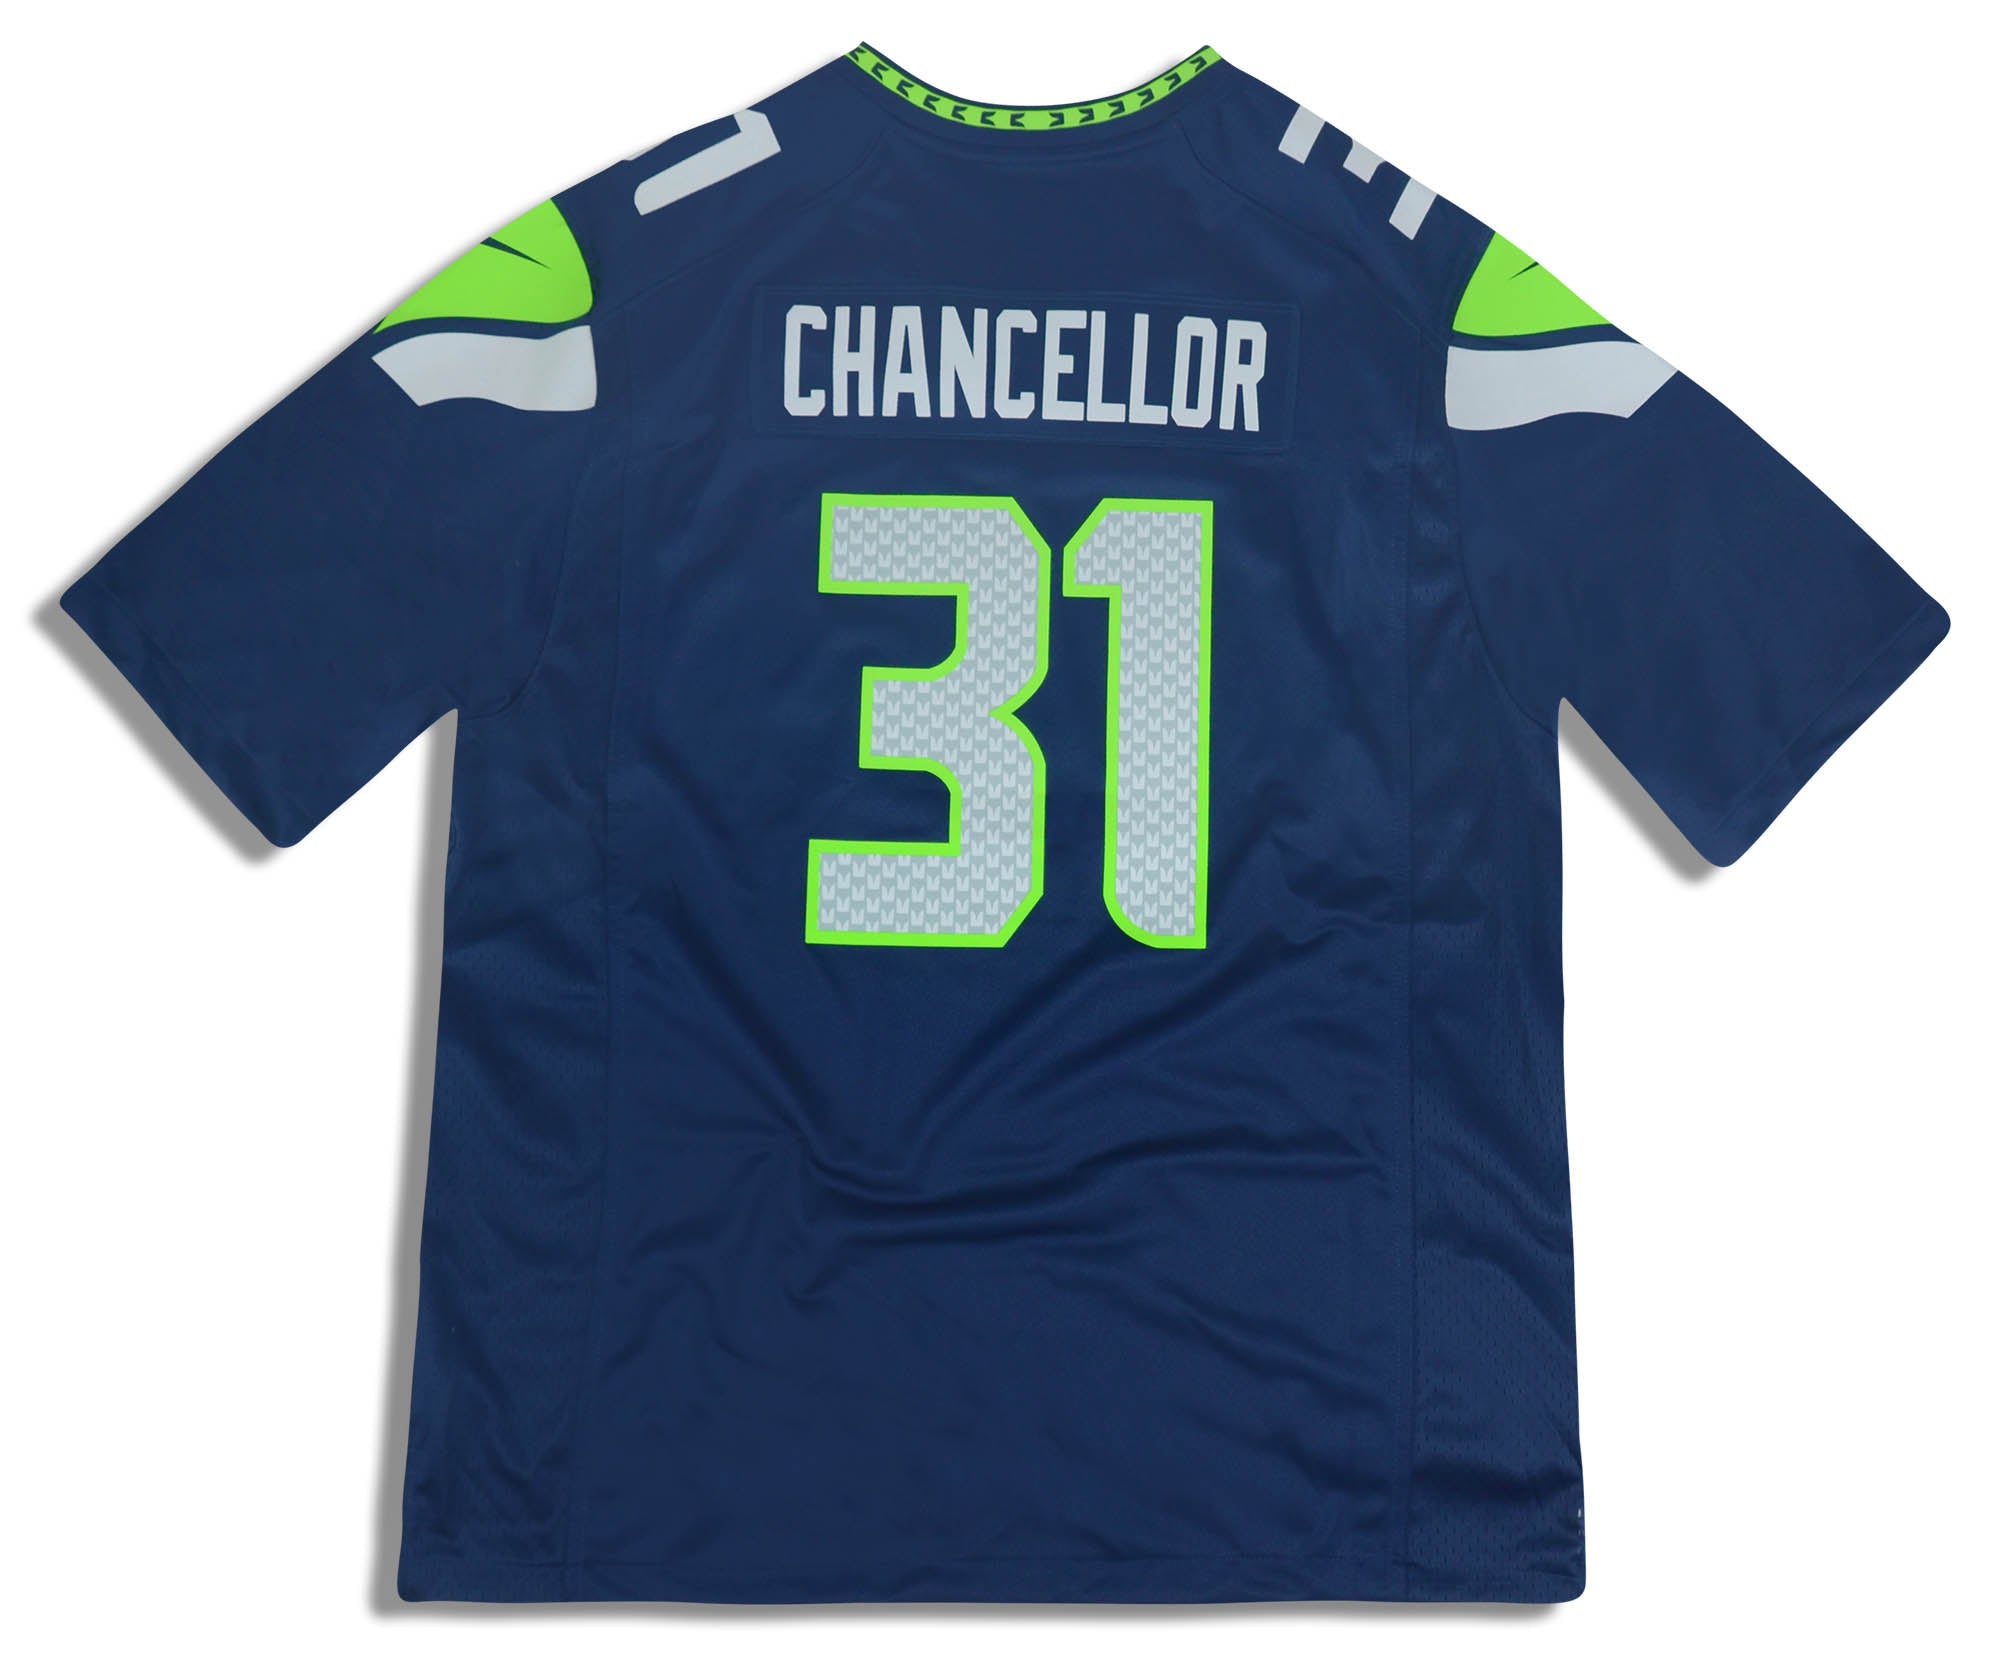 2018 SEATTLE SEAHAWKS CHANCELLOR #31 NIKE GAME JERSEY (HOME) XXL - *AS NEW*